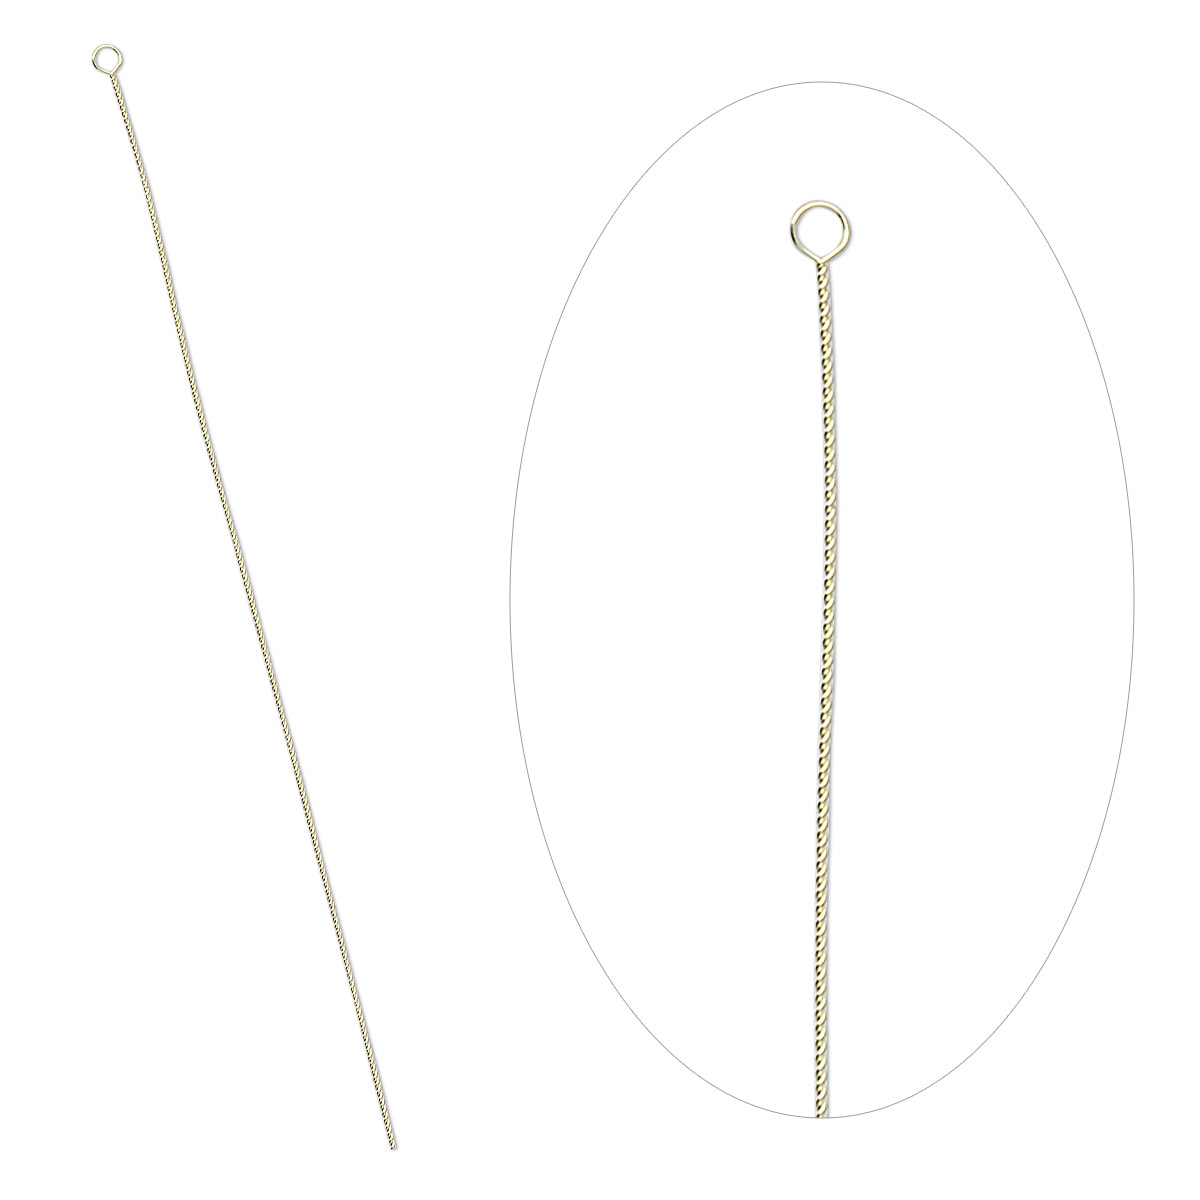 Needle, brass, #10 medium-heavy, 2-1/2 to 3-inch twisted wire. Sold per ...